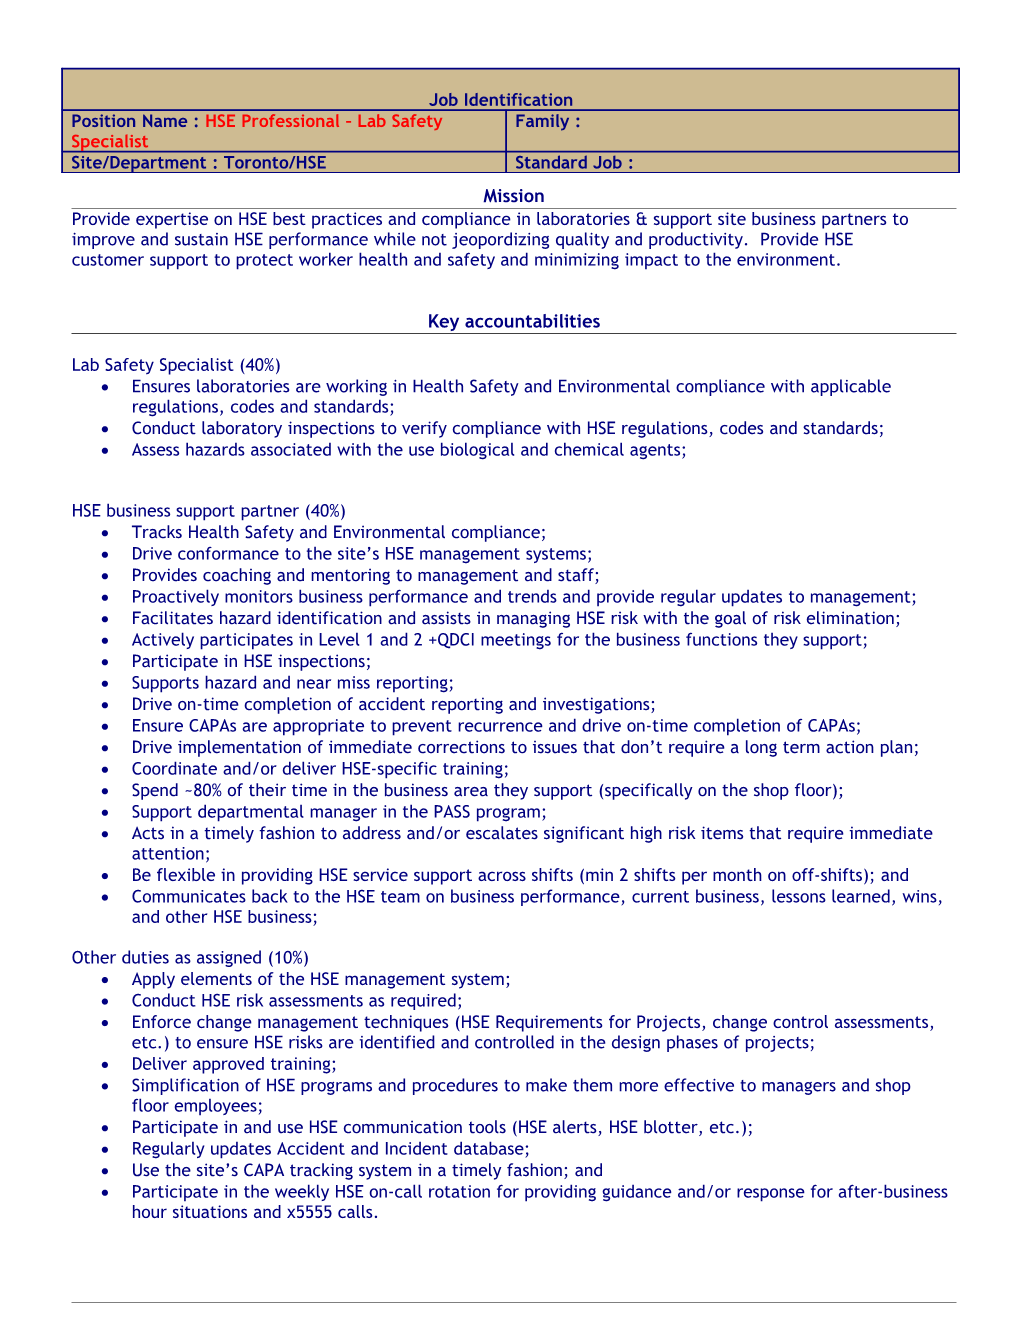 Top Executive Position Information Template